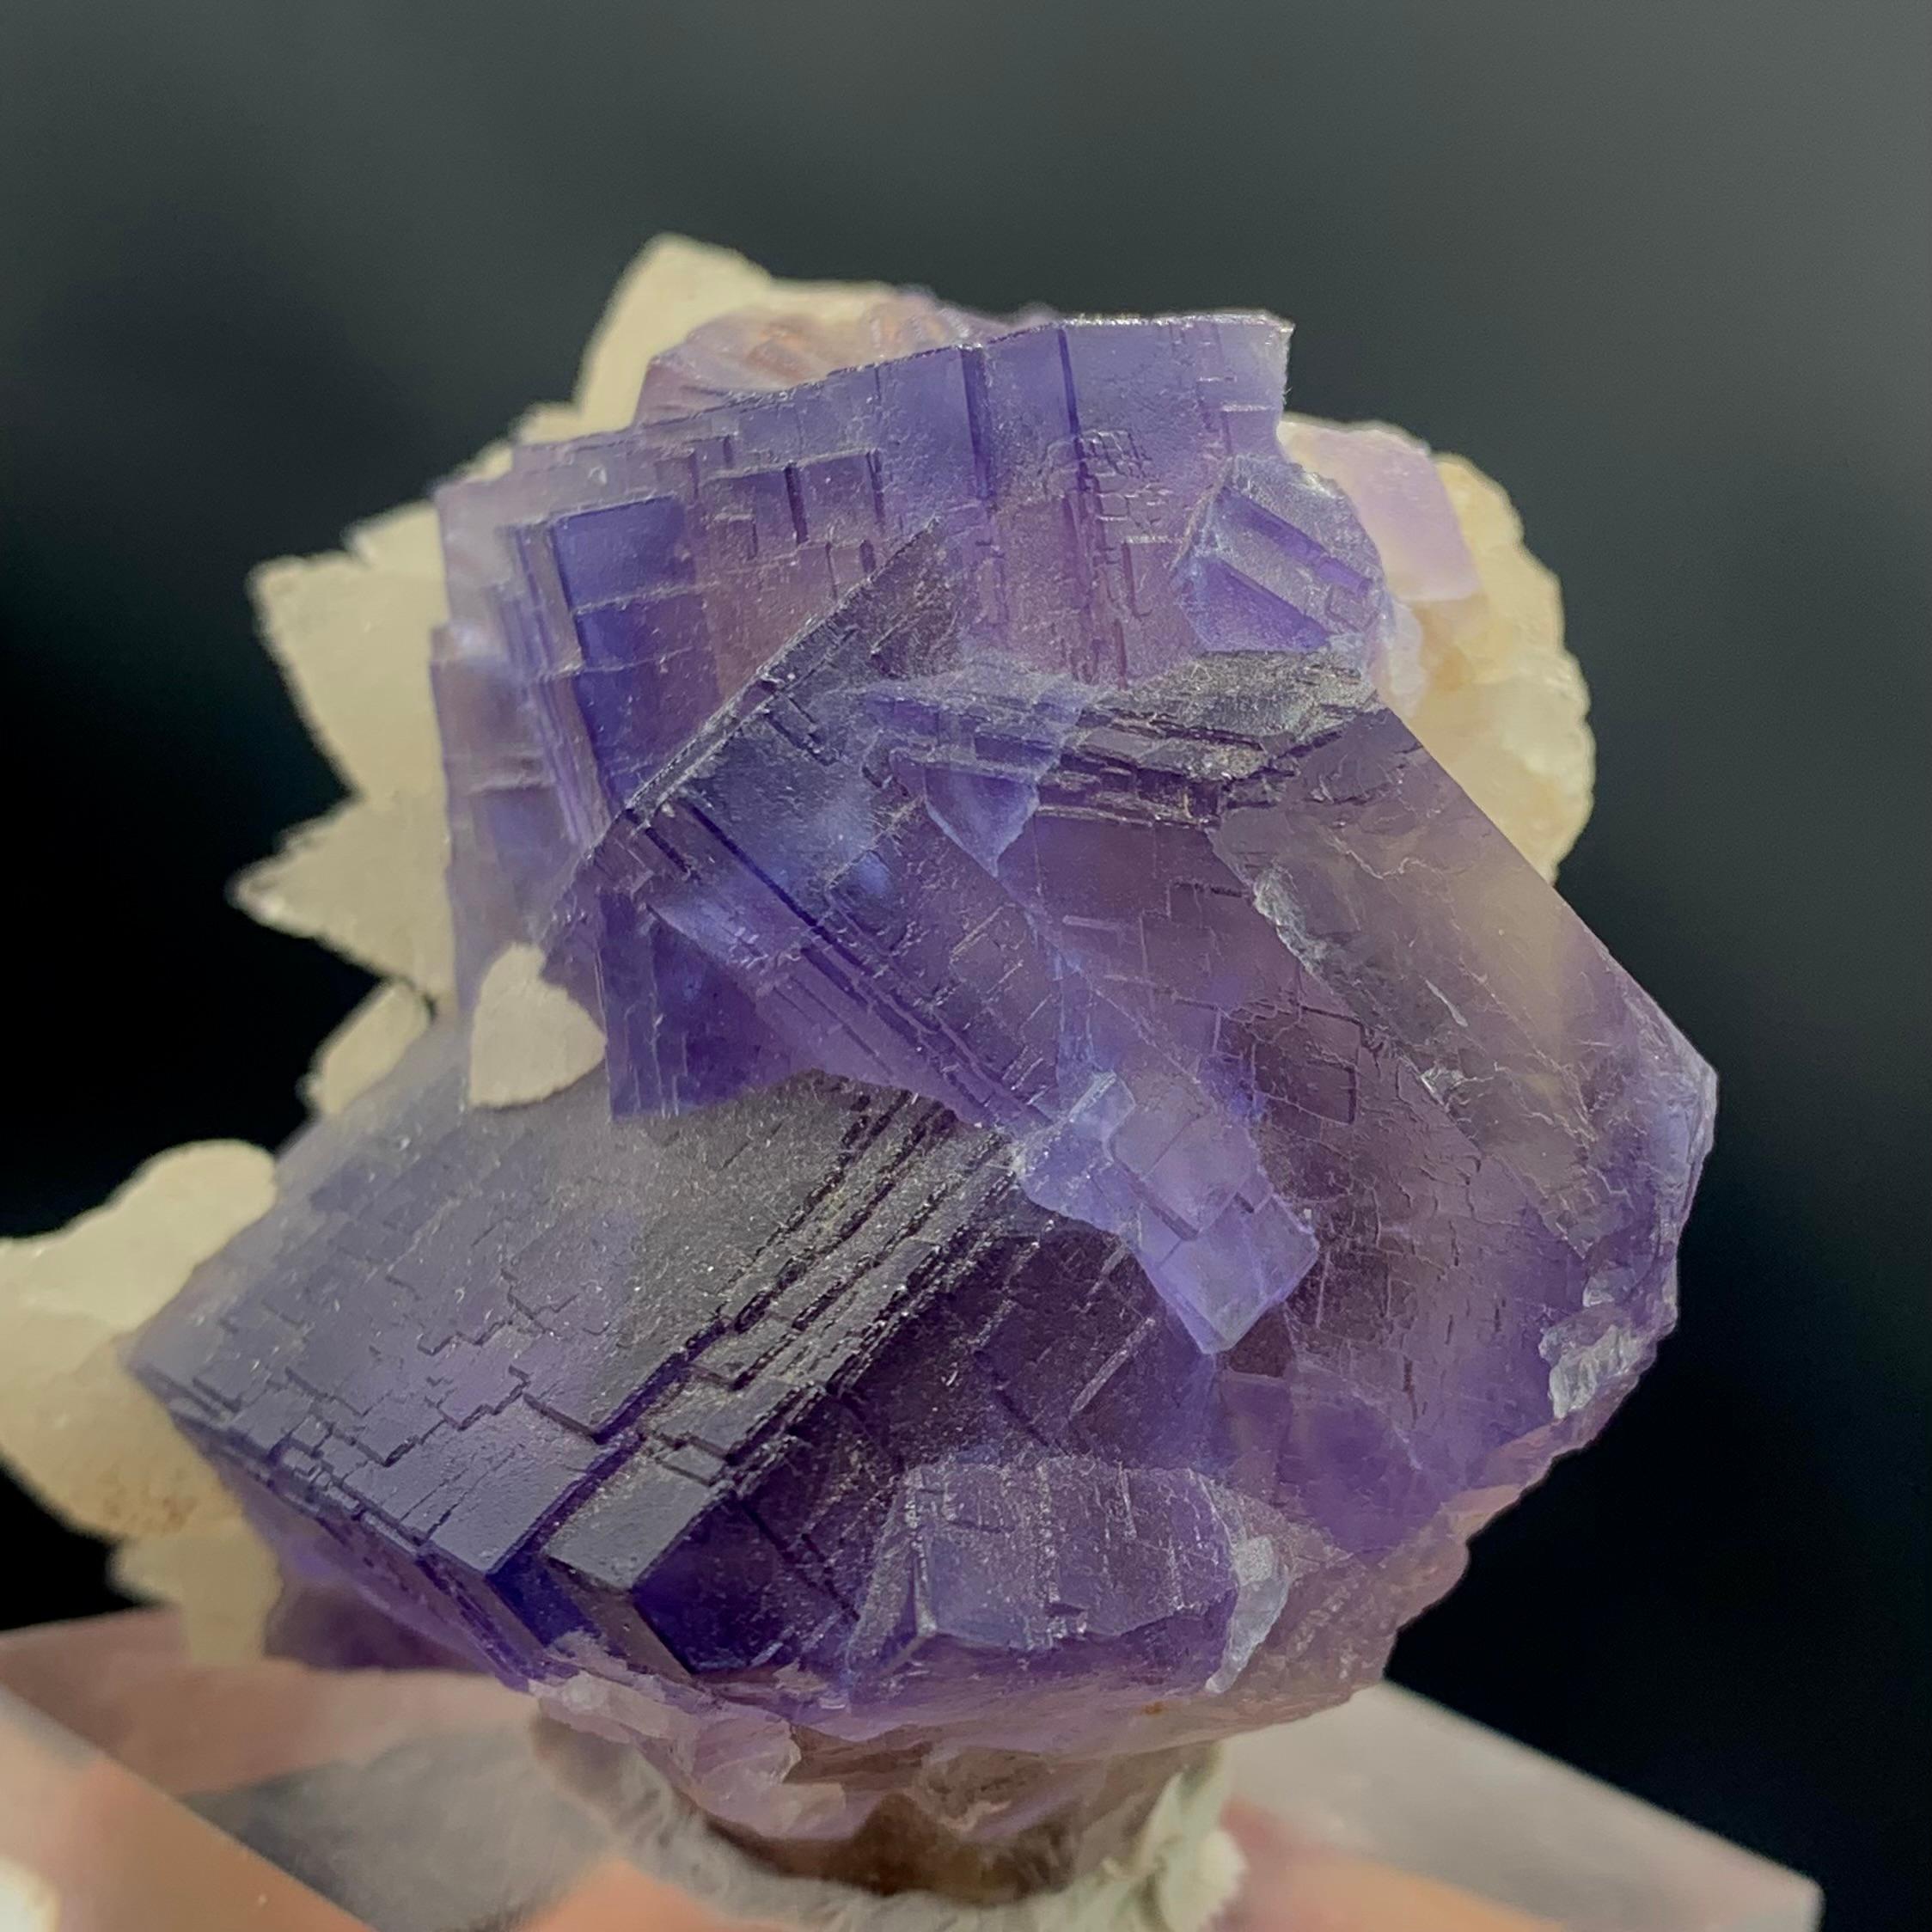 Glamorous natural purple cubic fluorite with dog tooth Calcite Specimen 
WEIGHT: 101.12 grams
DIMENSIONS: 4.5 x 4.6 x 3.2 Cm
ORIGIN : Balochistan, Pakistan
TREATMENT None

The Fluorite meaning comes from the Latin word for flux, referring to the